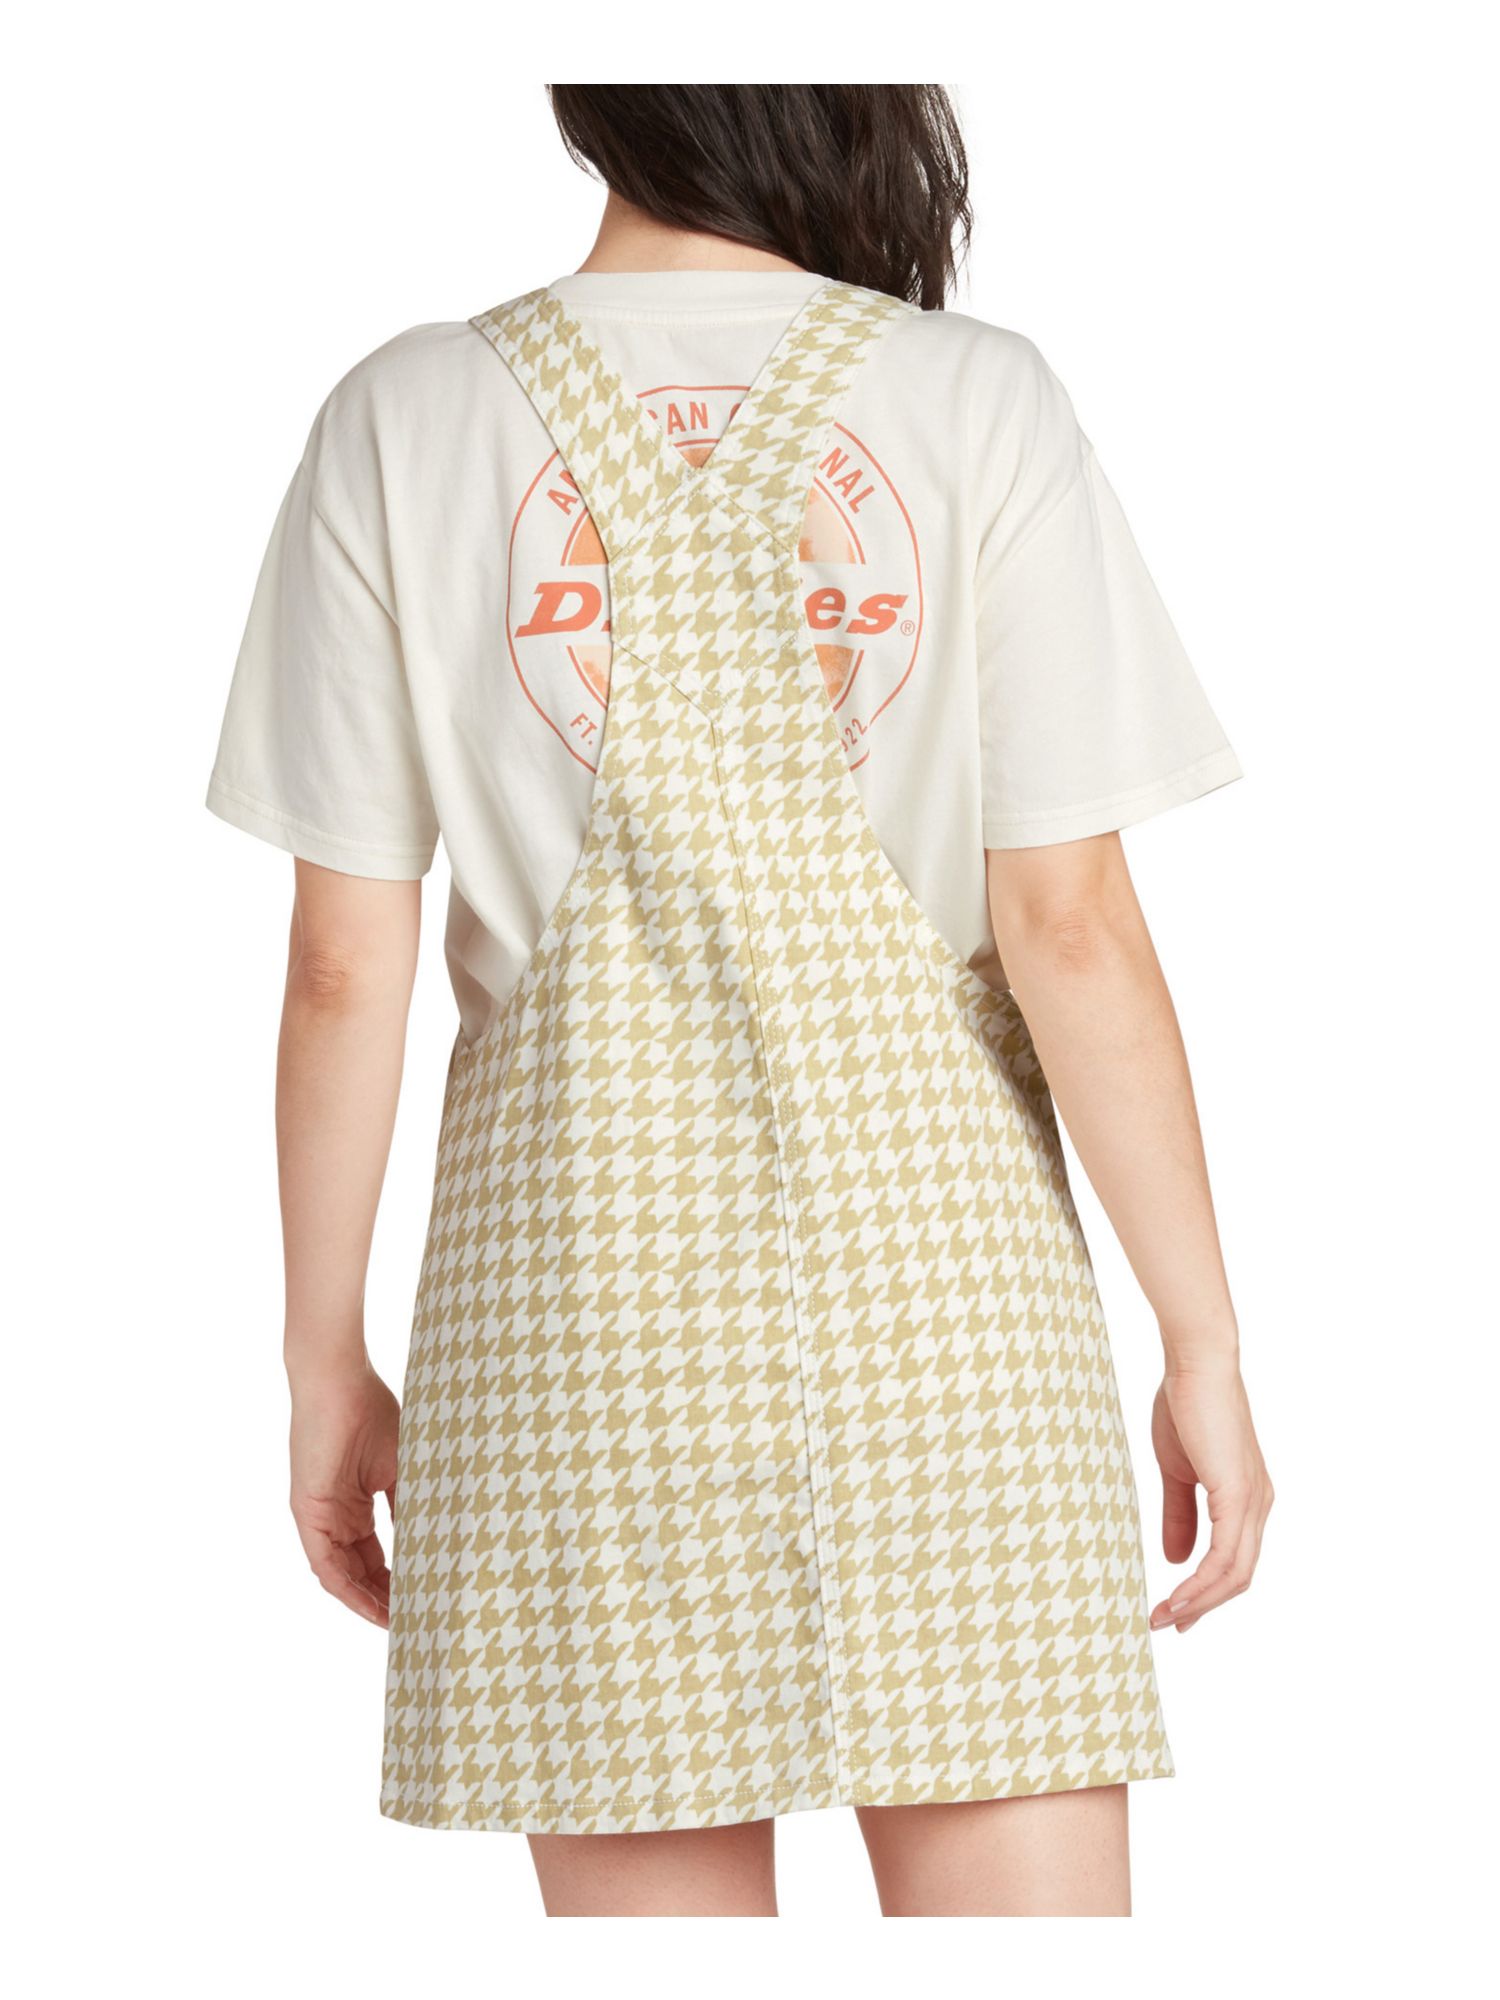 DICKIES Womens White Adjustable Pocketed Overall Houndstooth Sleeveless Square Neck Short Shift Dress XS